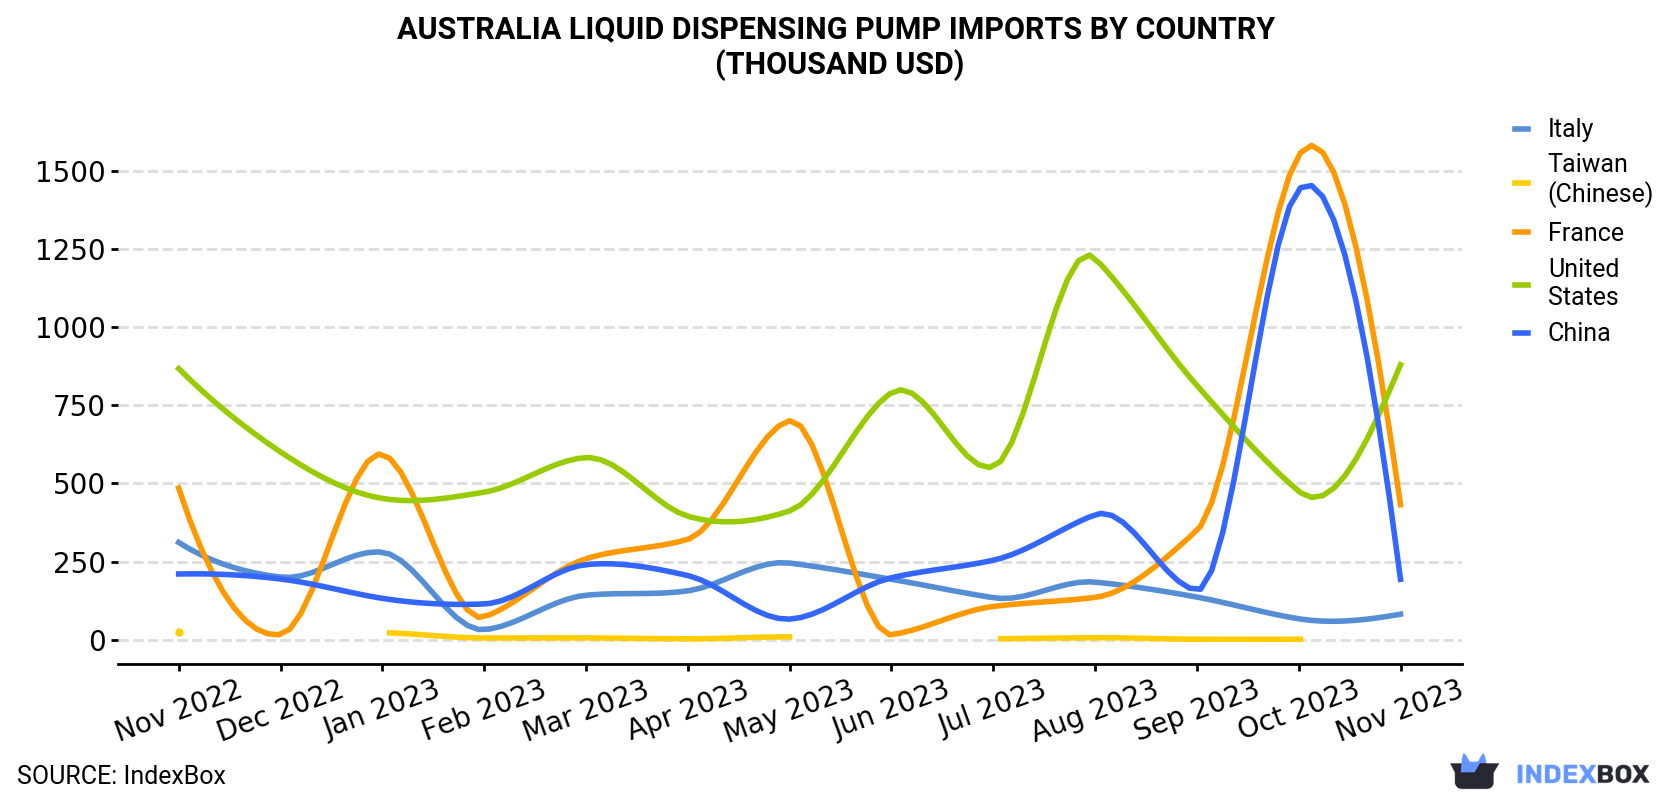 Australia Liquid Dispensing Pump Imports By Country (Thousand USD)